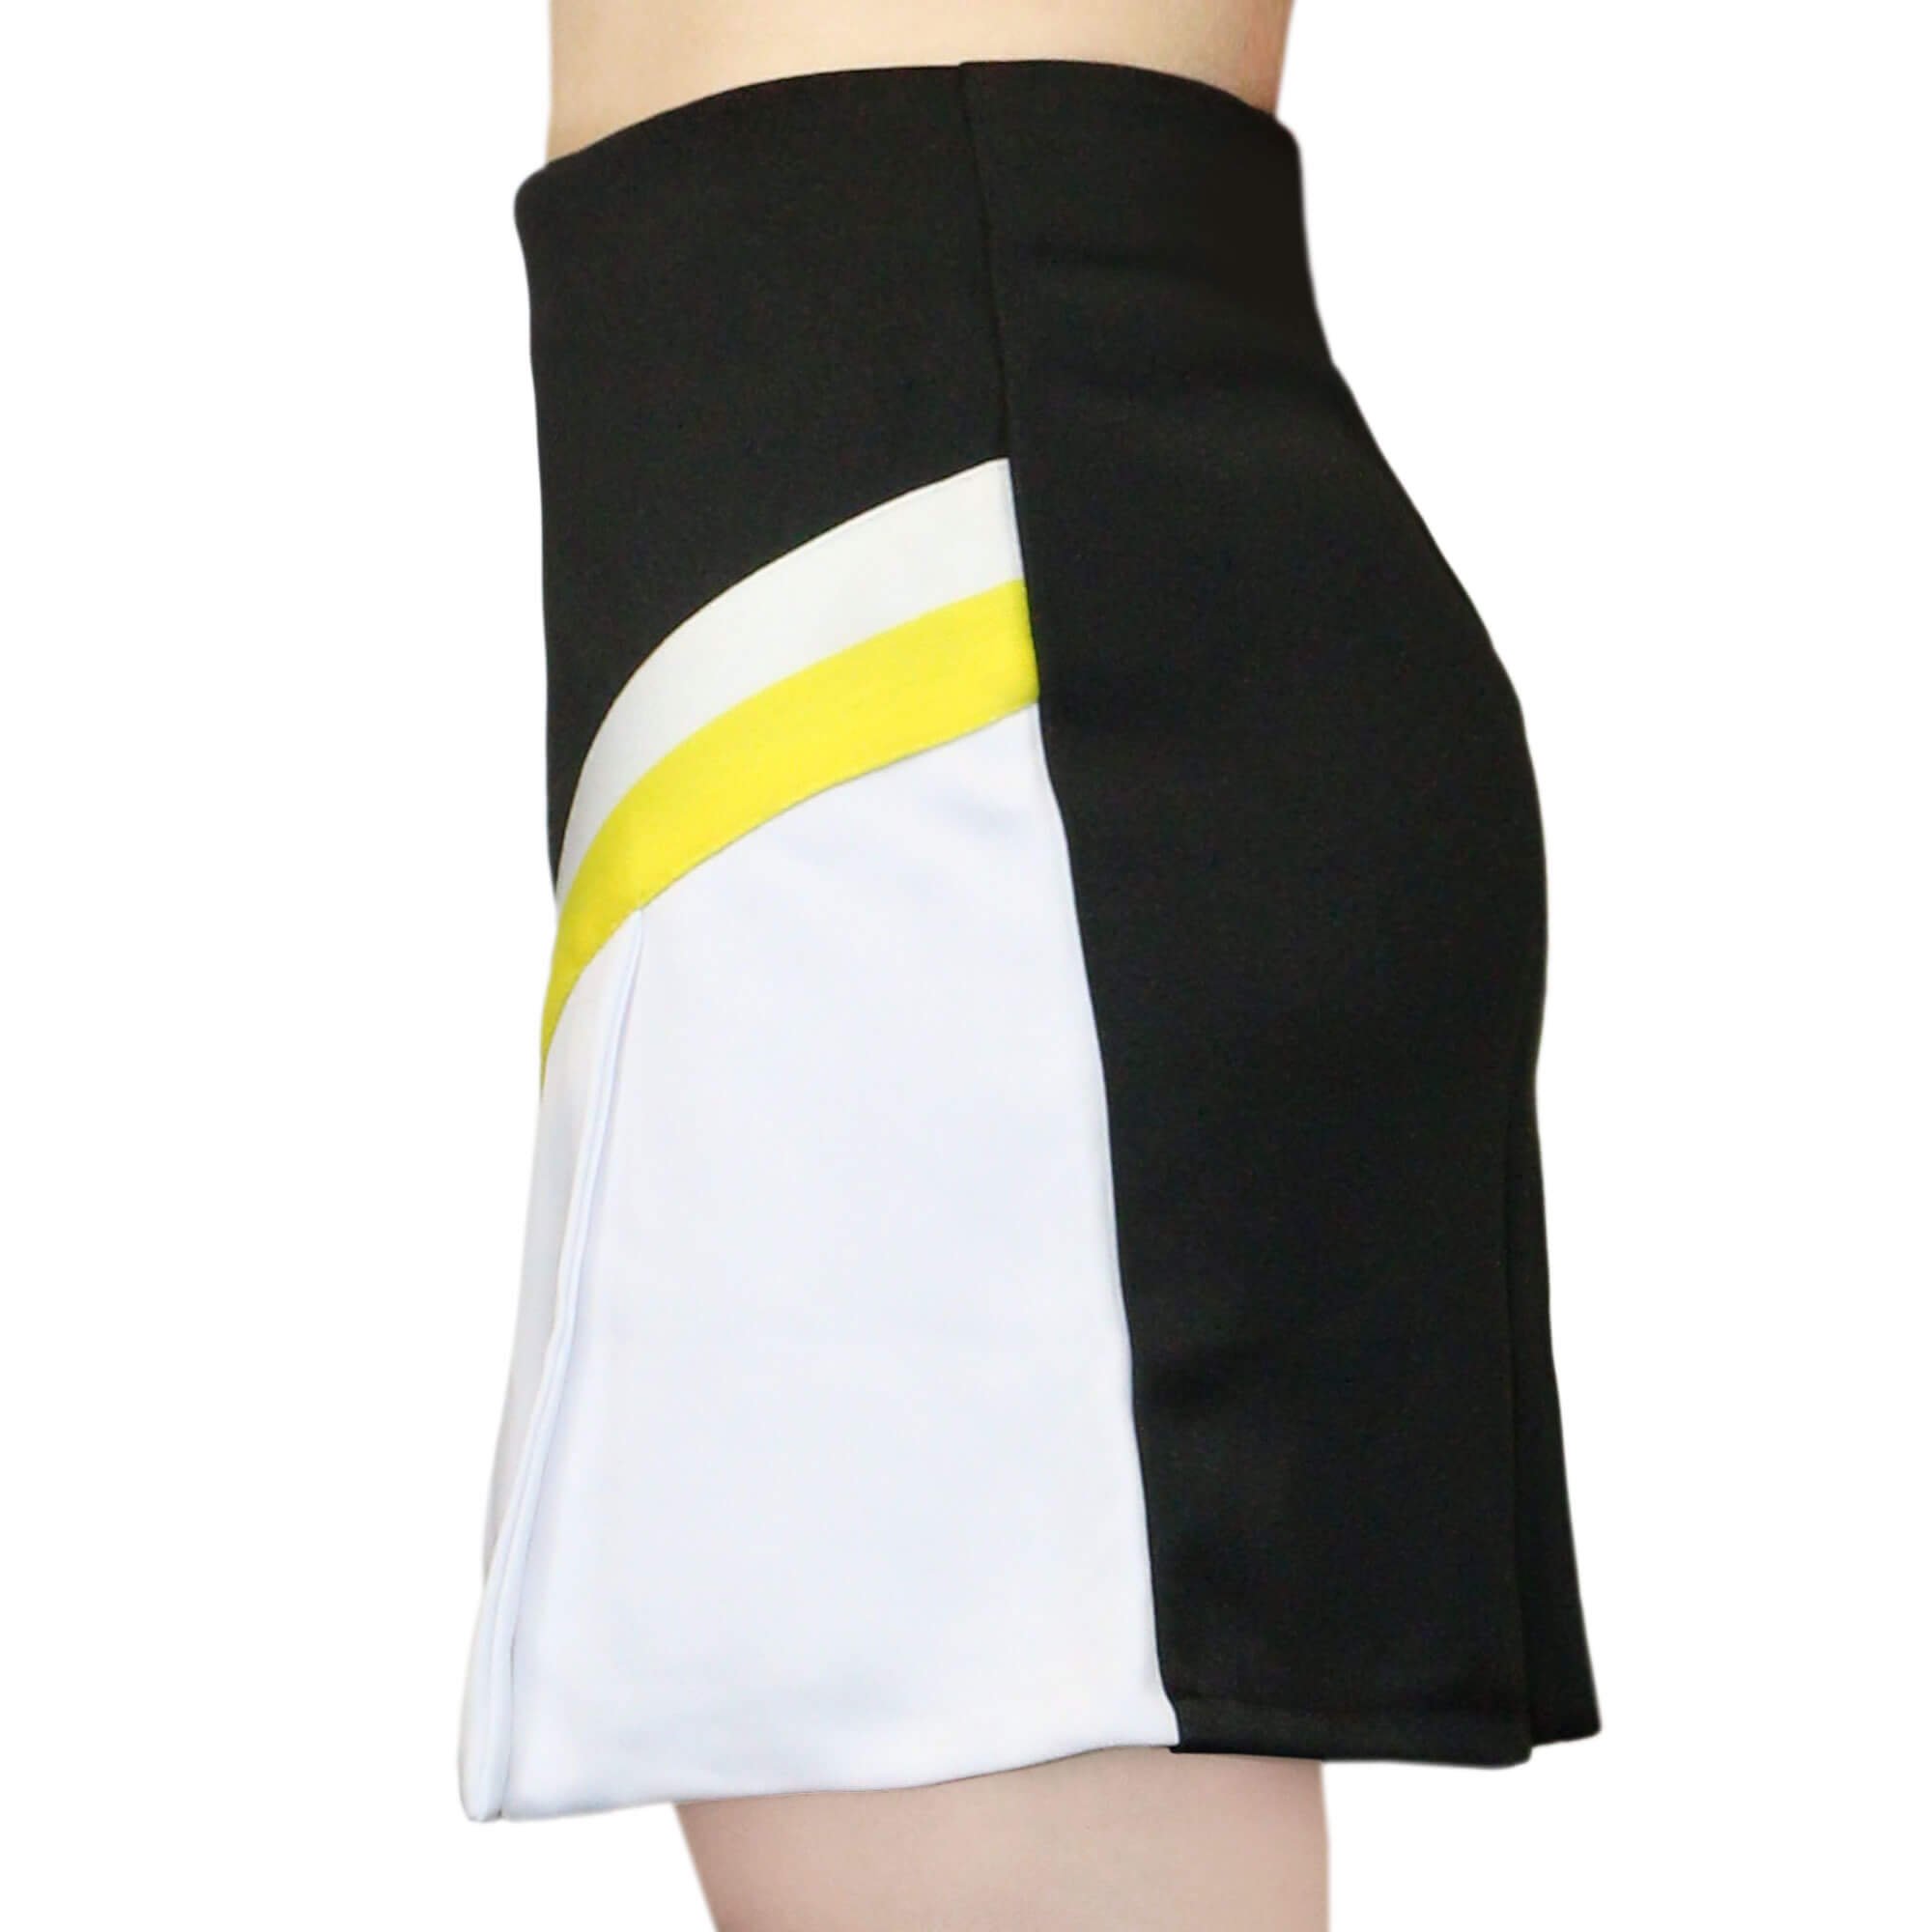 Danzcue Adult A-Line Cheerleading Knit Pleat Skirt - Click Image to Close